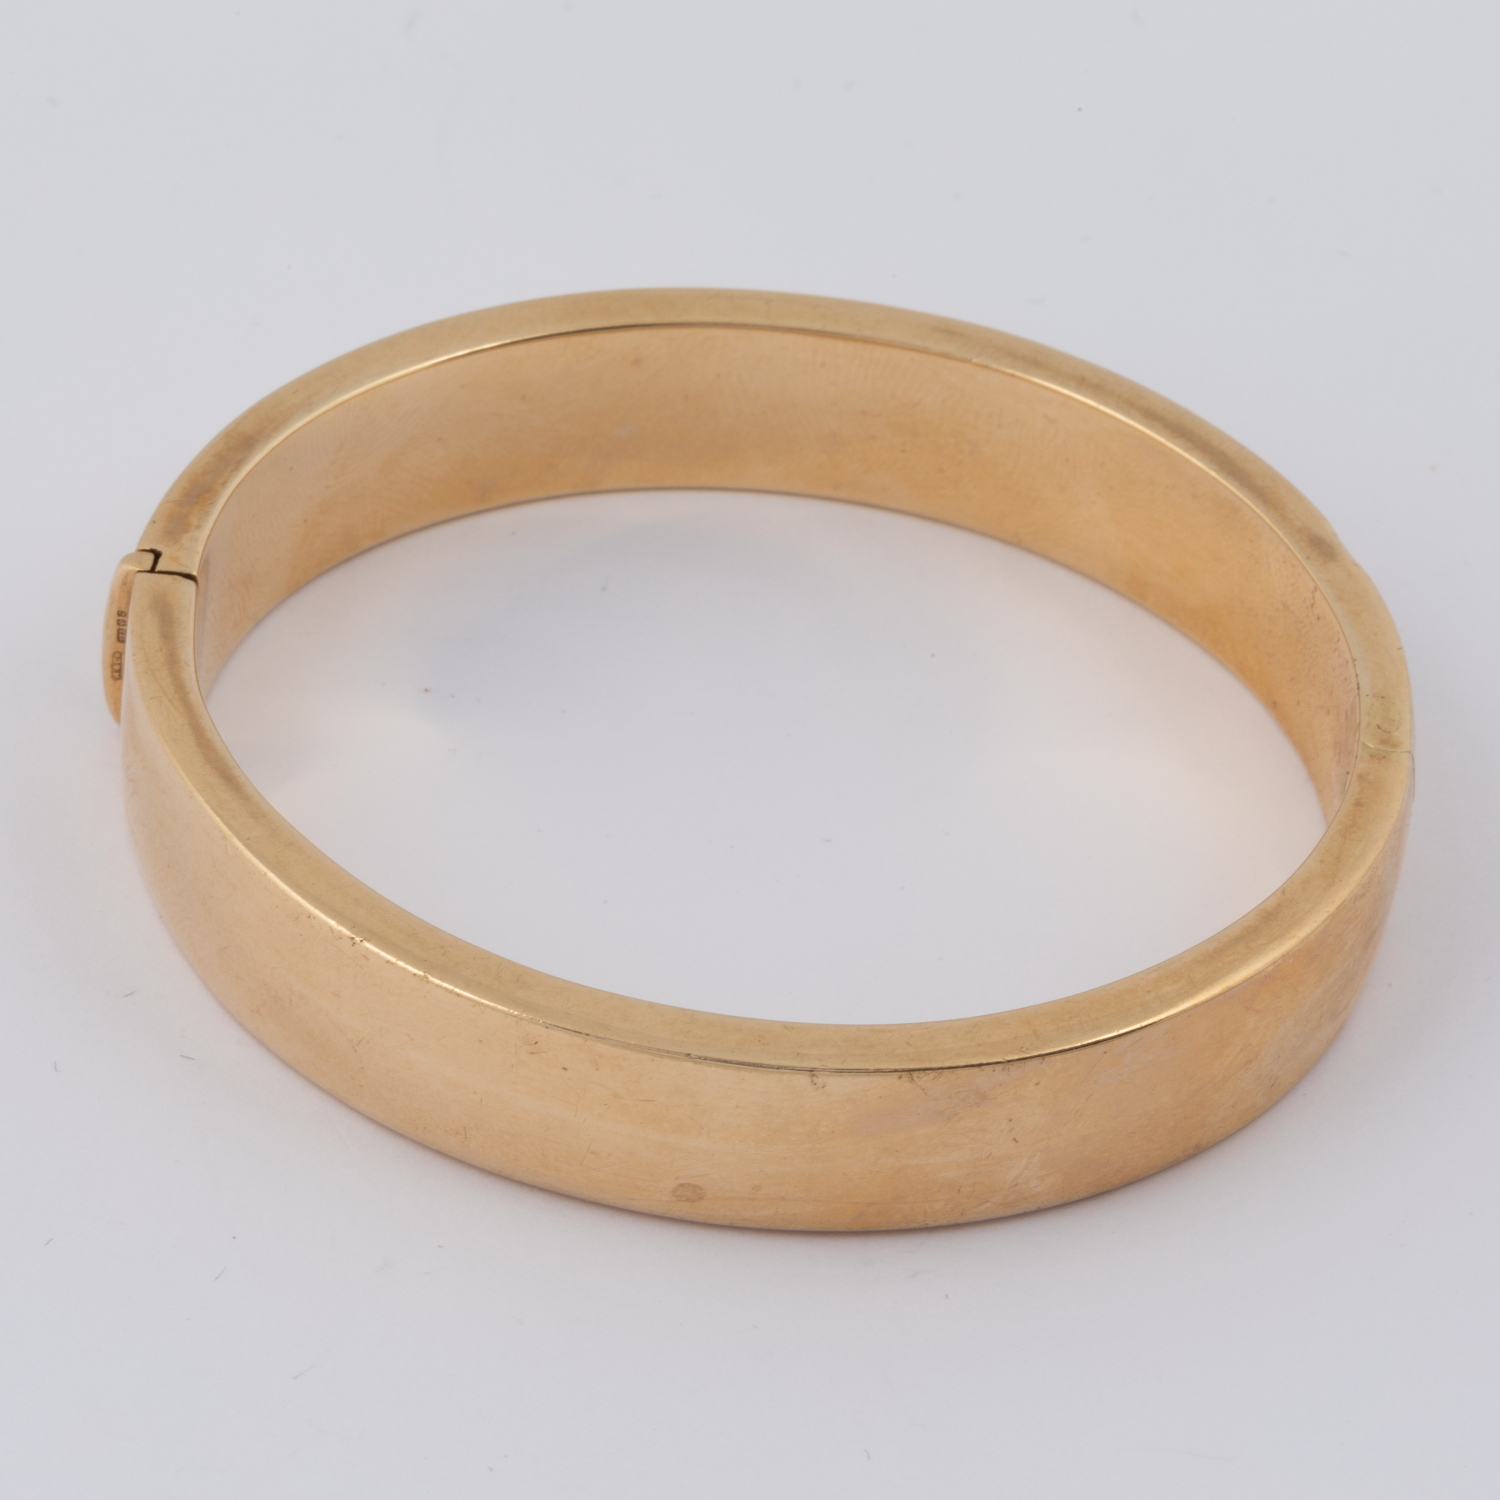 A 9ct yellow gold hinged bangle with push in clasp, inside diameter 6cm x 5cm, 24.00gm